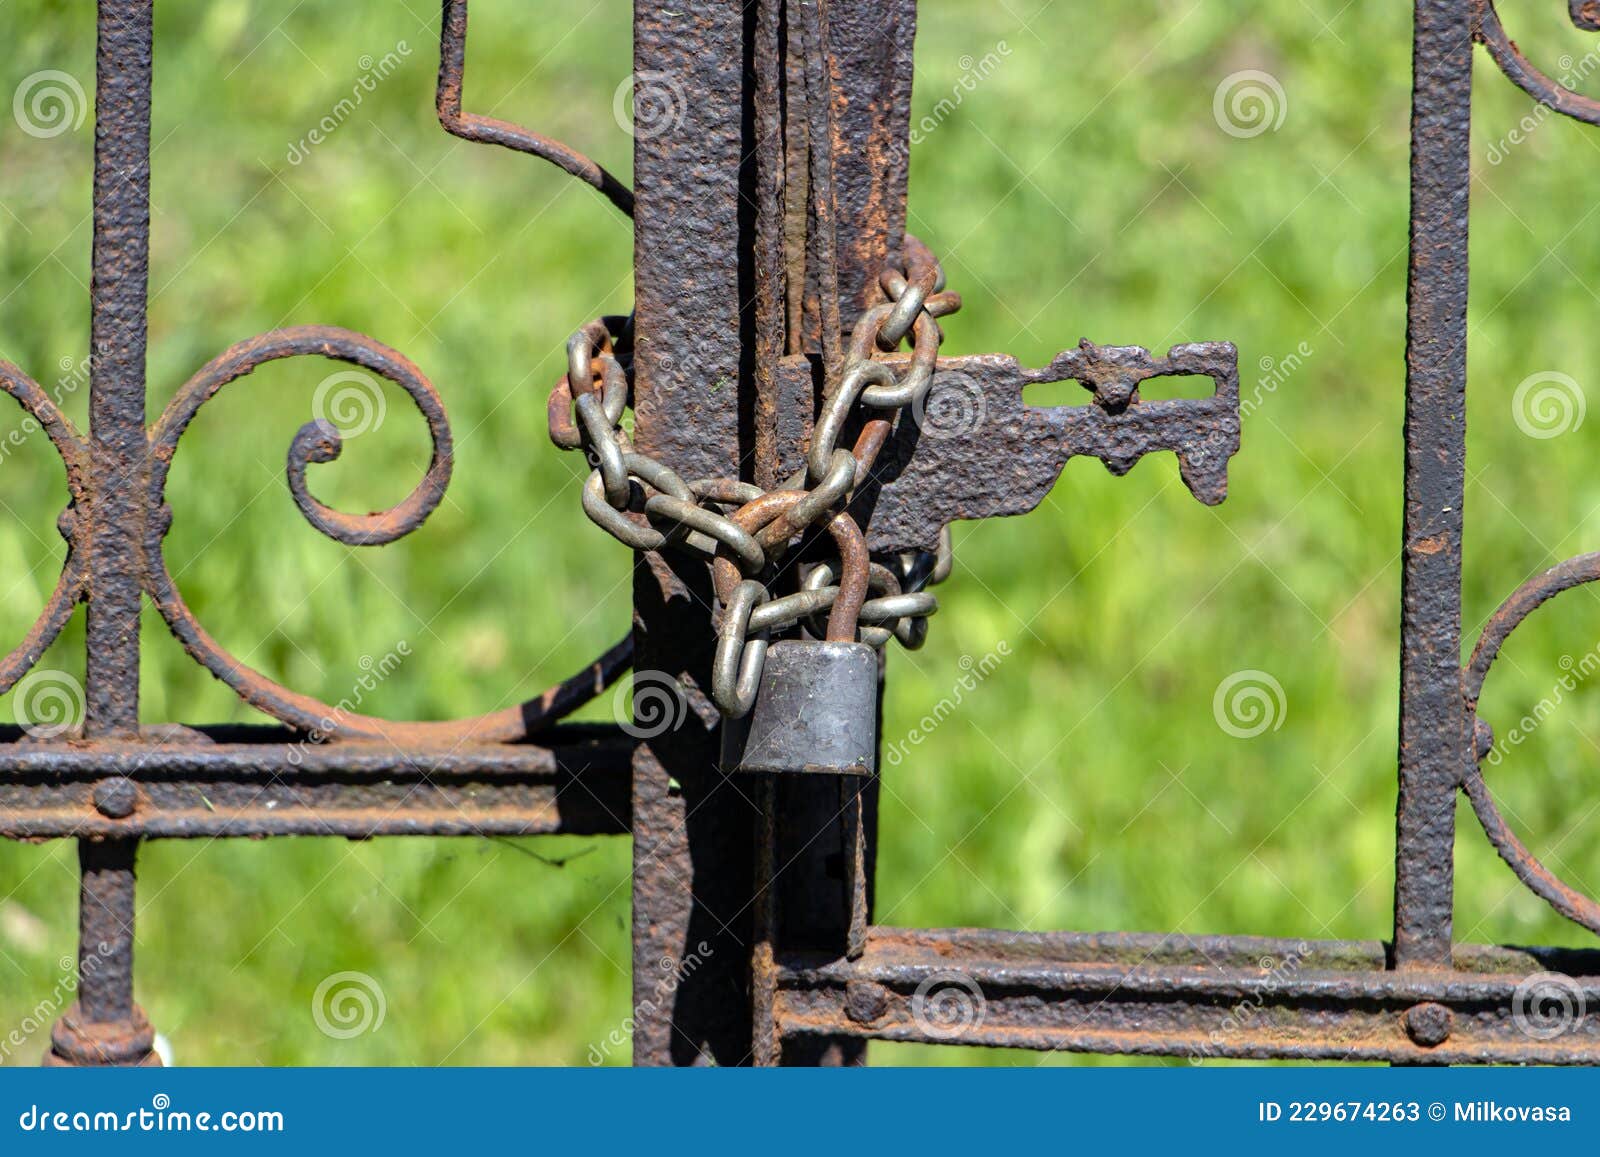 The Rusty Gate is Locked with a Padlock with a Chain Stock Image ...